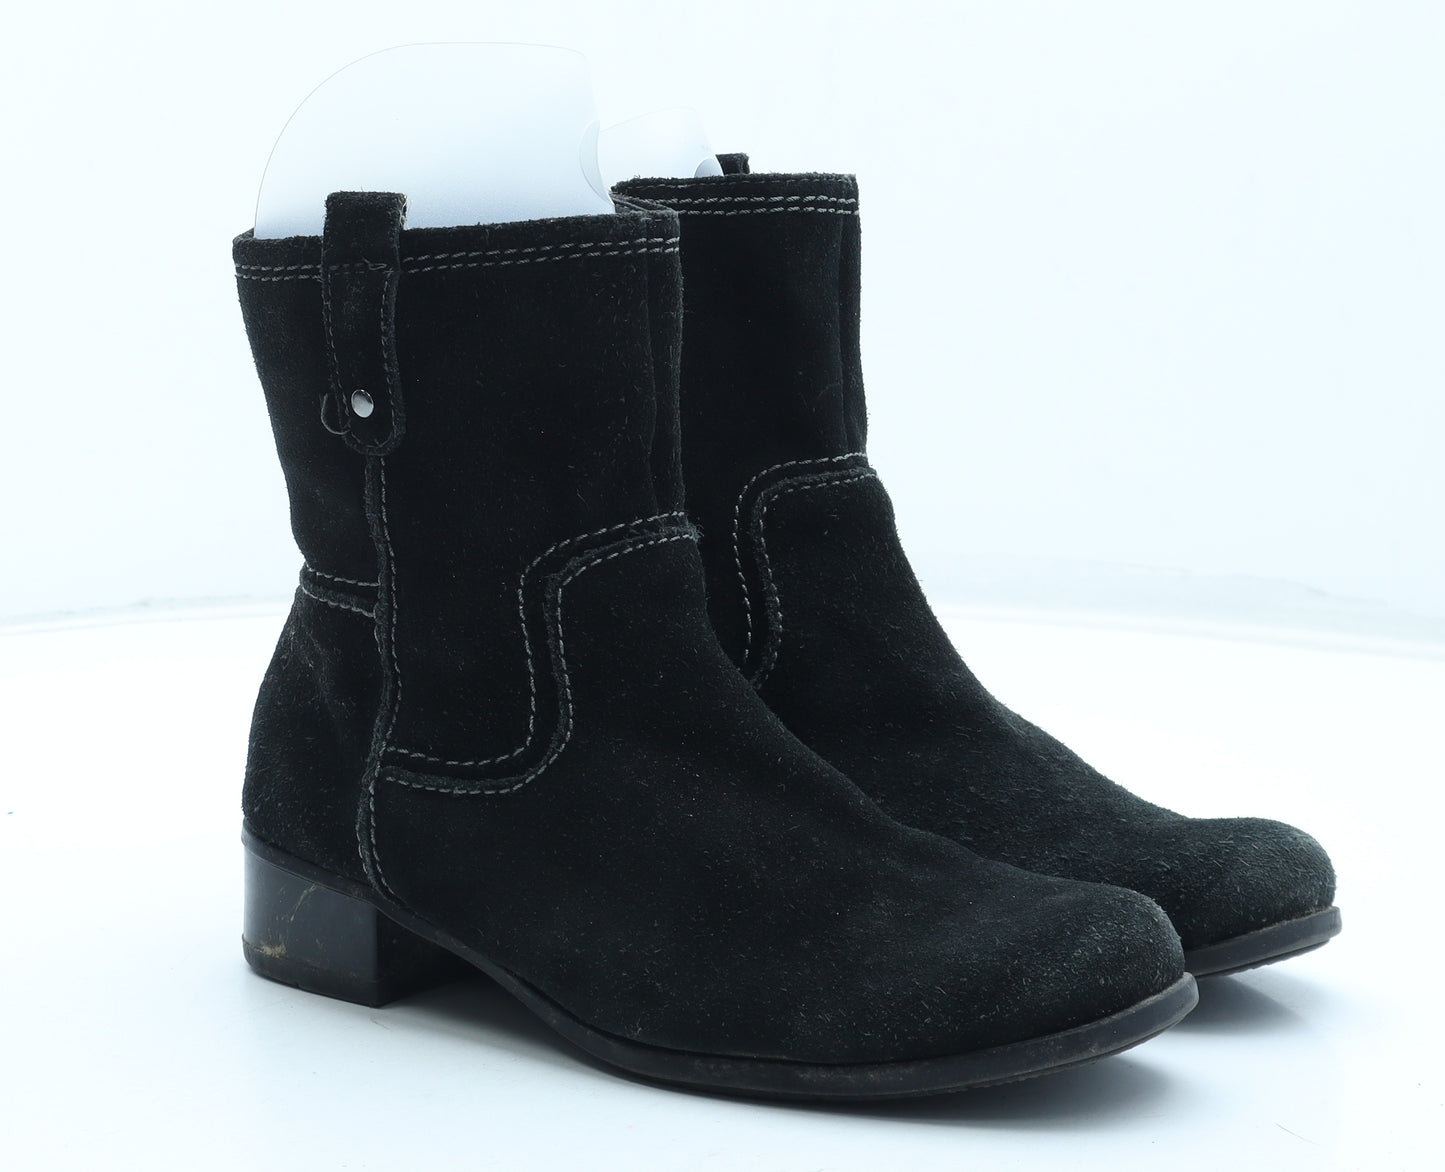 FootGlove Womens Black Leather Bootie Boot UK